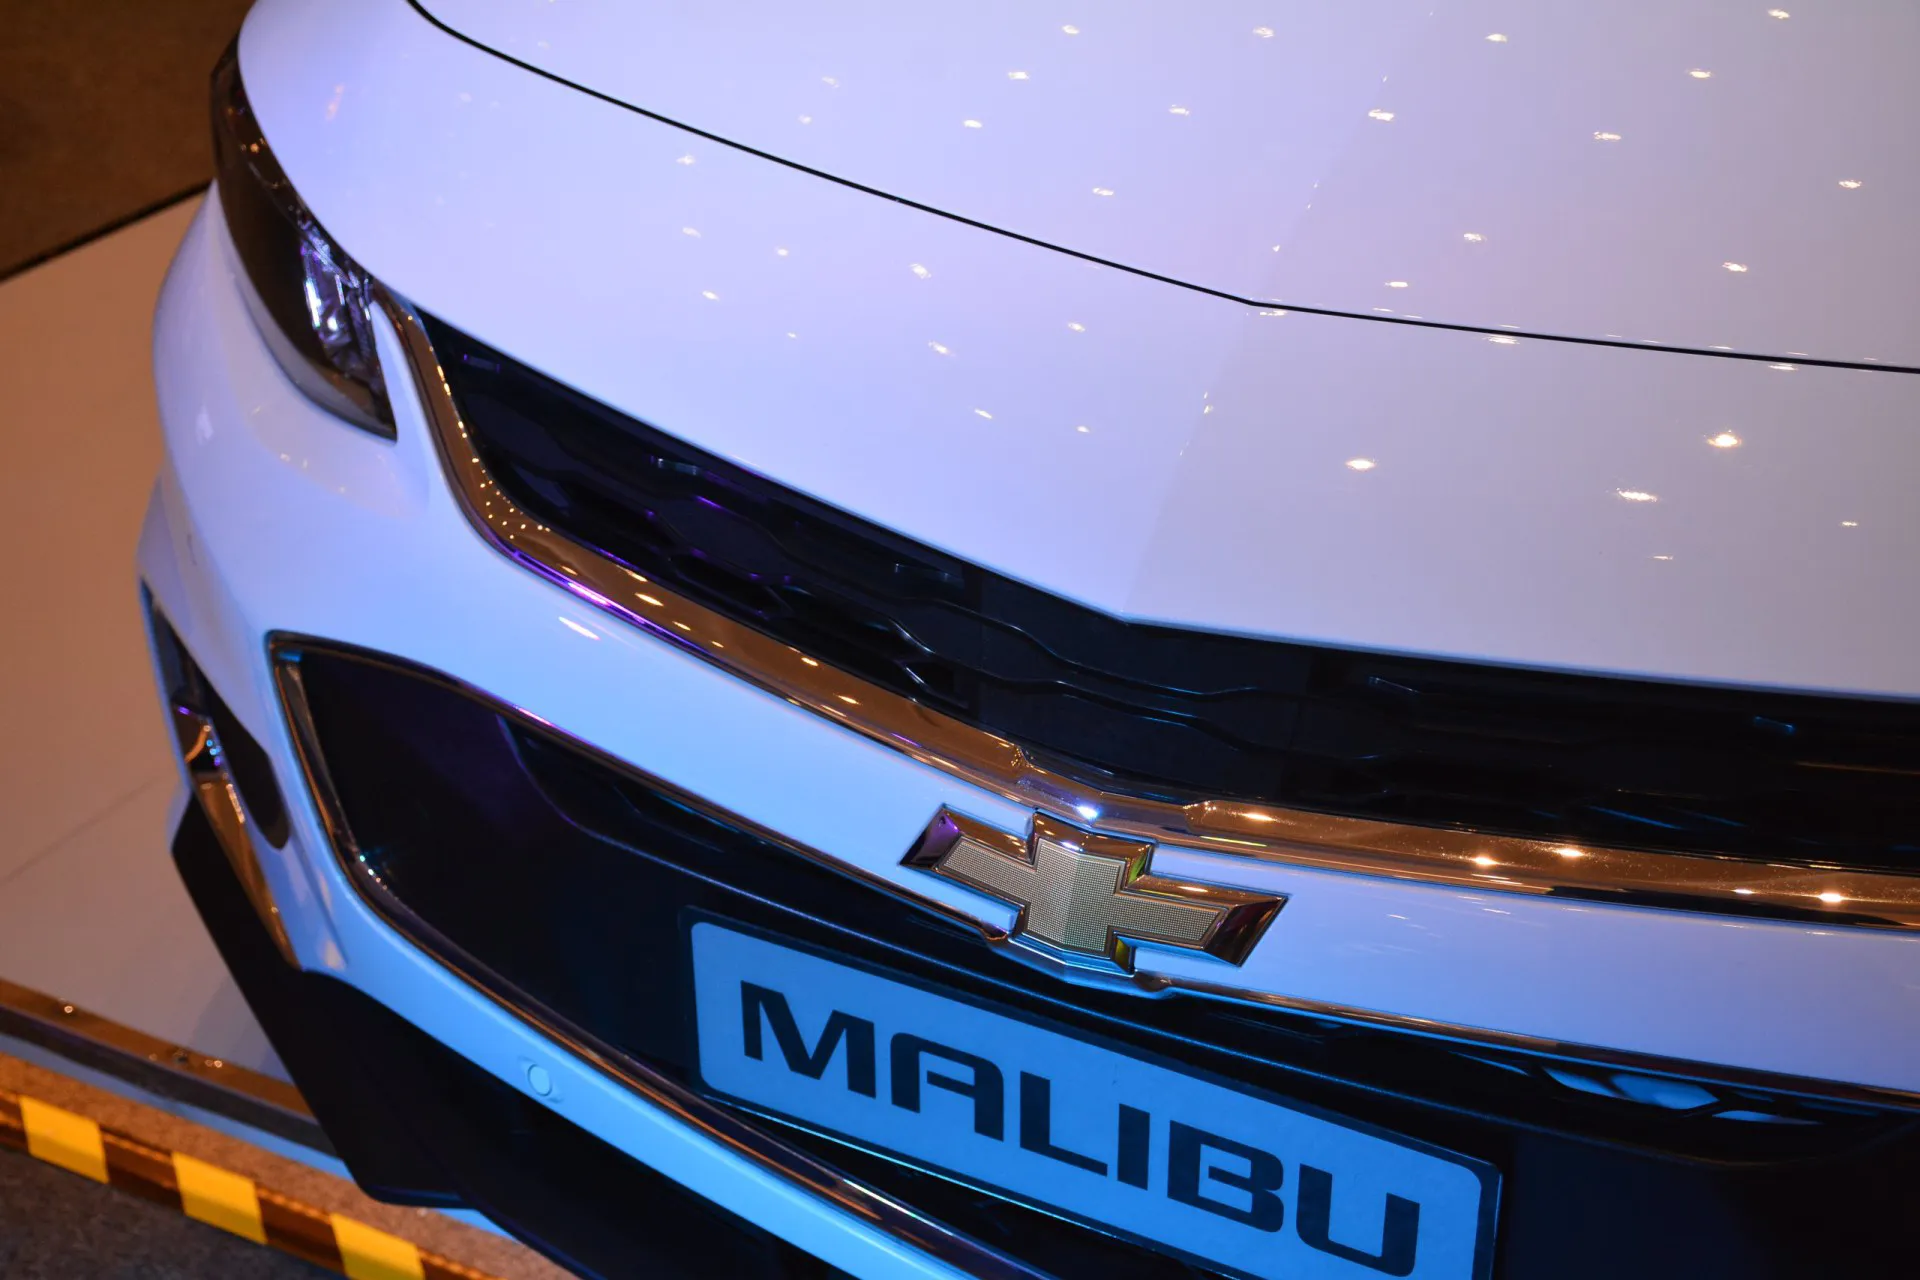 Up-close photo of Chevrolet Malibu front grille